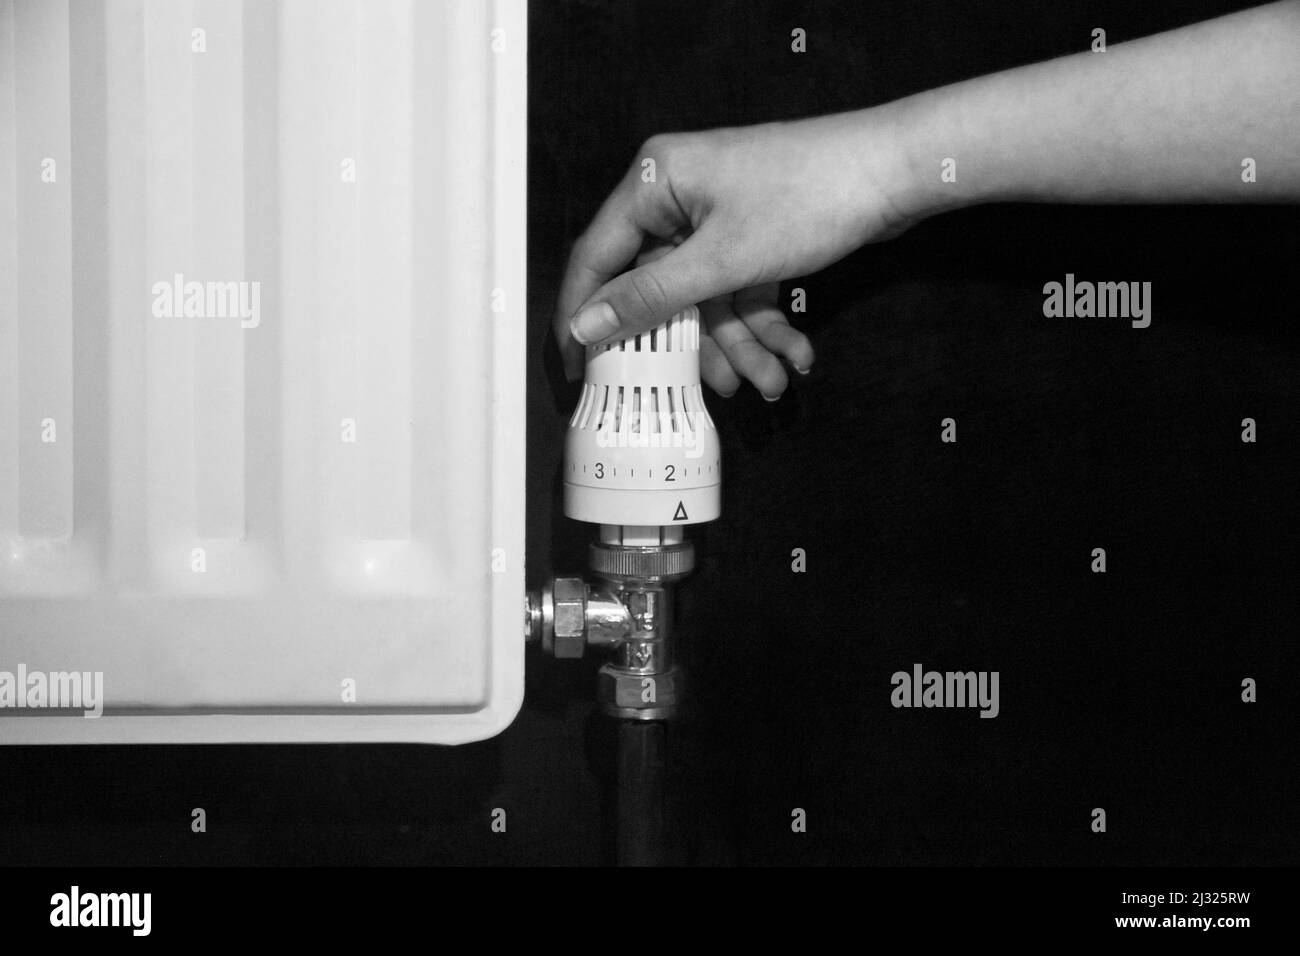 Hand turning down the control valve of a radiator, in black and white Stock Photo